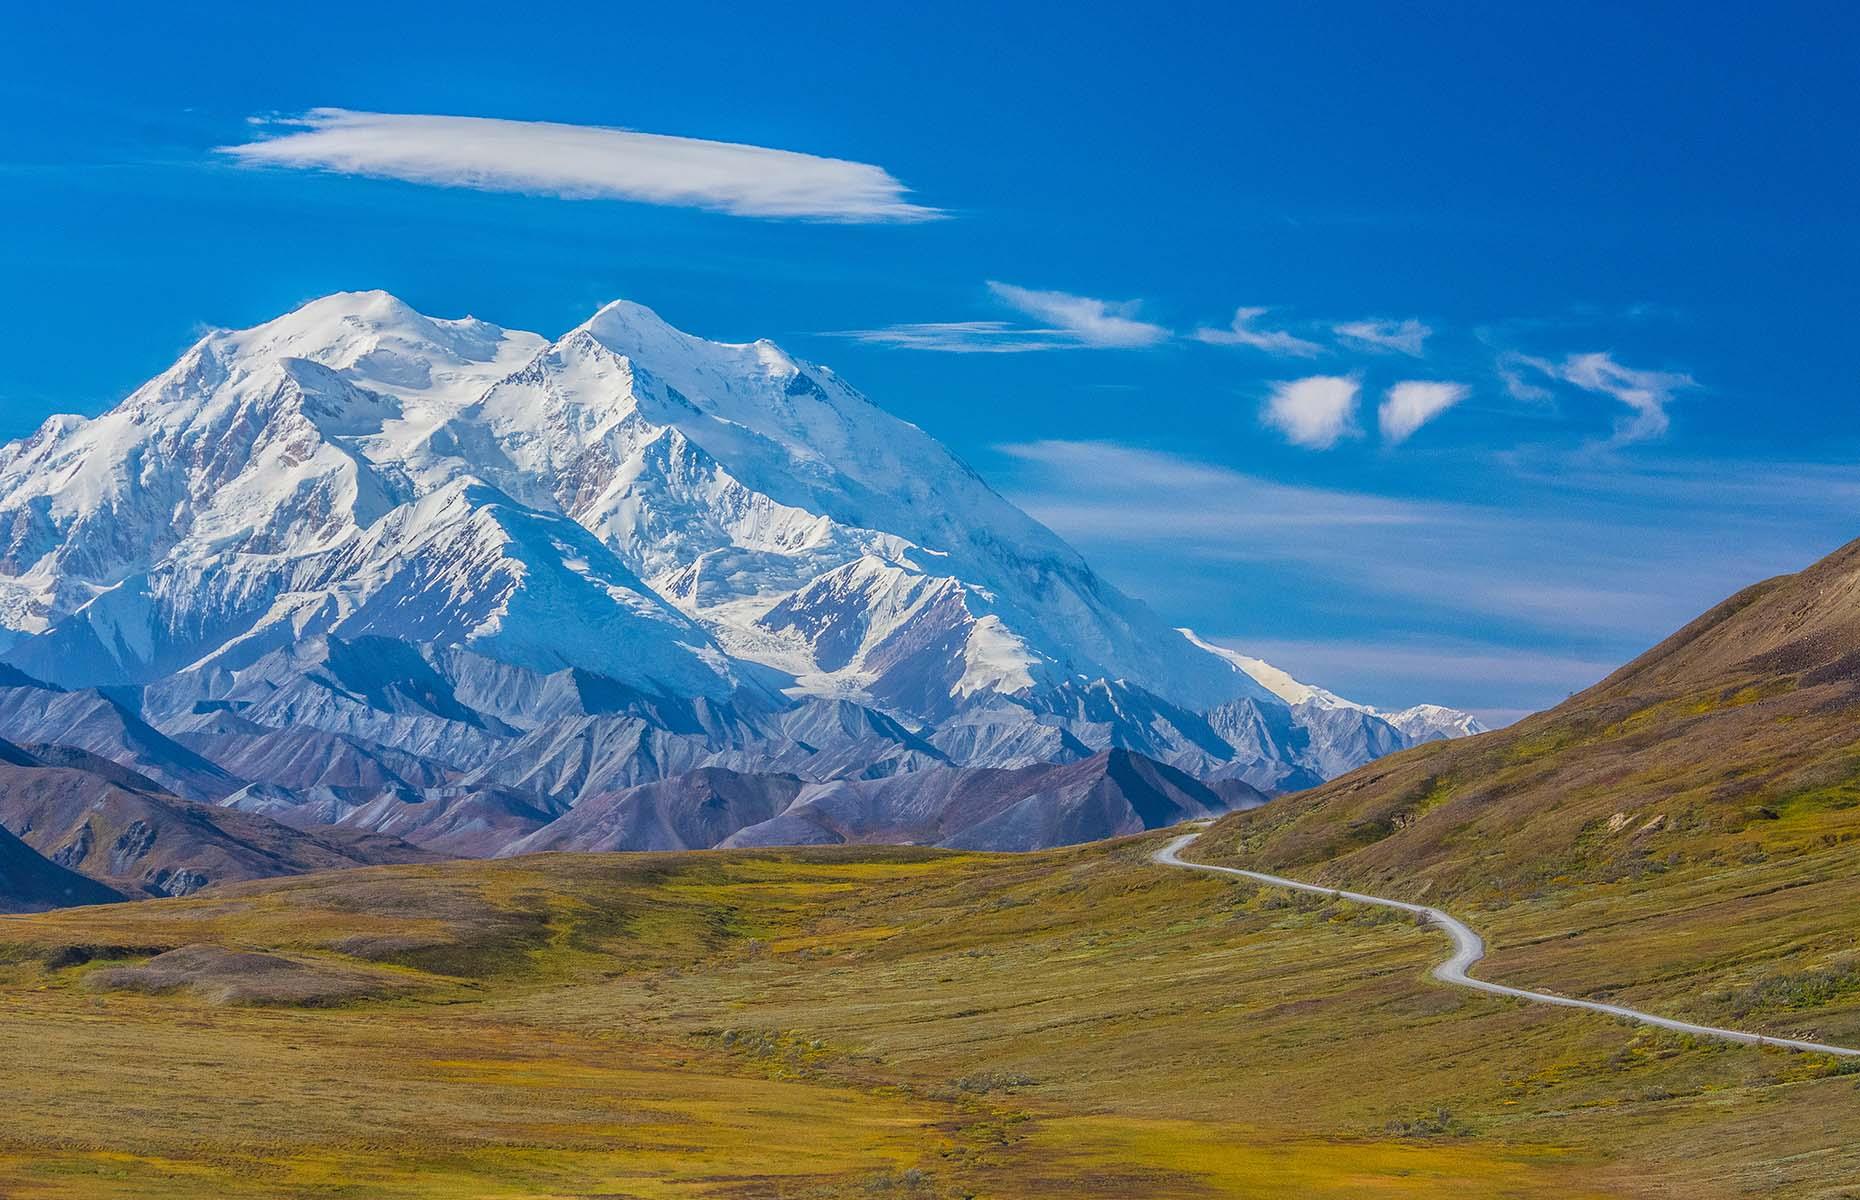 <p>High on many travelers' wish lists, Mount Denali is North America’s tallest peak, rising a dizzying 20,310 feet (6,190m) above sea level. Located in south-central Alaska, the native Koyukon Athabascan people named it Denali, which translates as The Great One. However, in 1896, a gold prospector decided to name the mountain after then-presidential nominee William McKinley, spurring a naming dispute which lasted more than a century. After a 40-year stint of officially being called Mount McKinley, the name was changed back to Denali in 2015.</p>